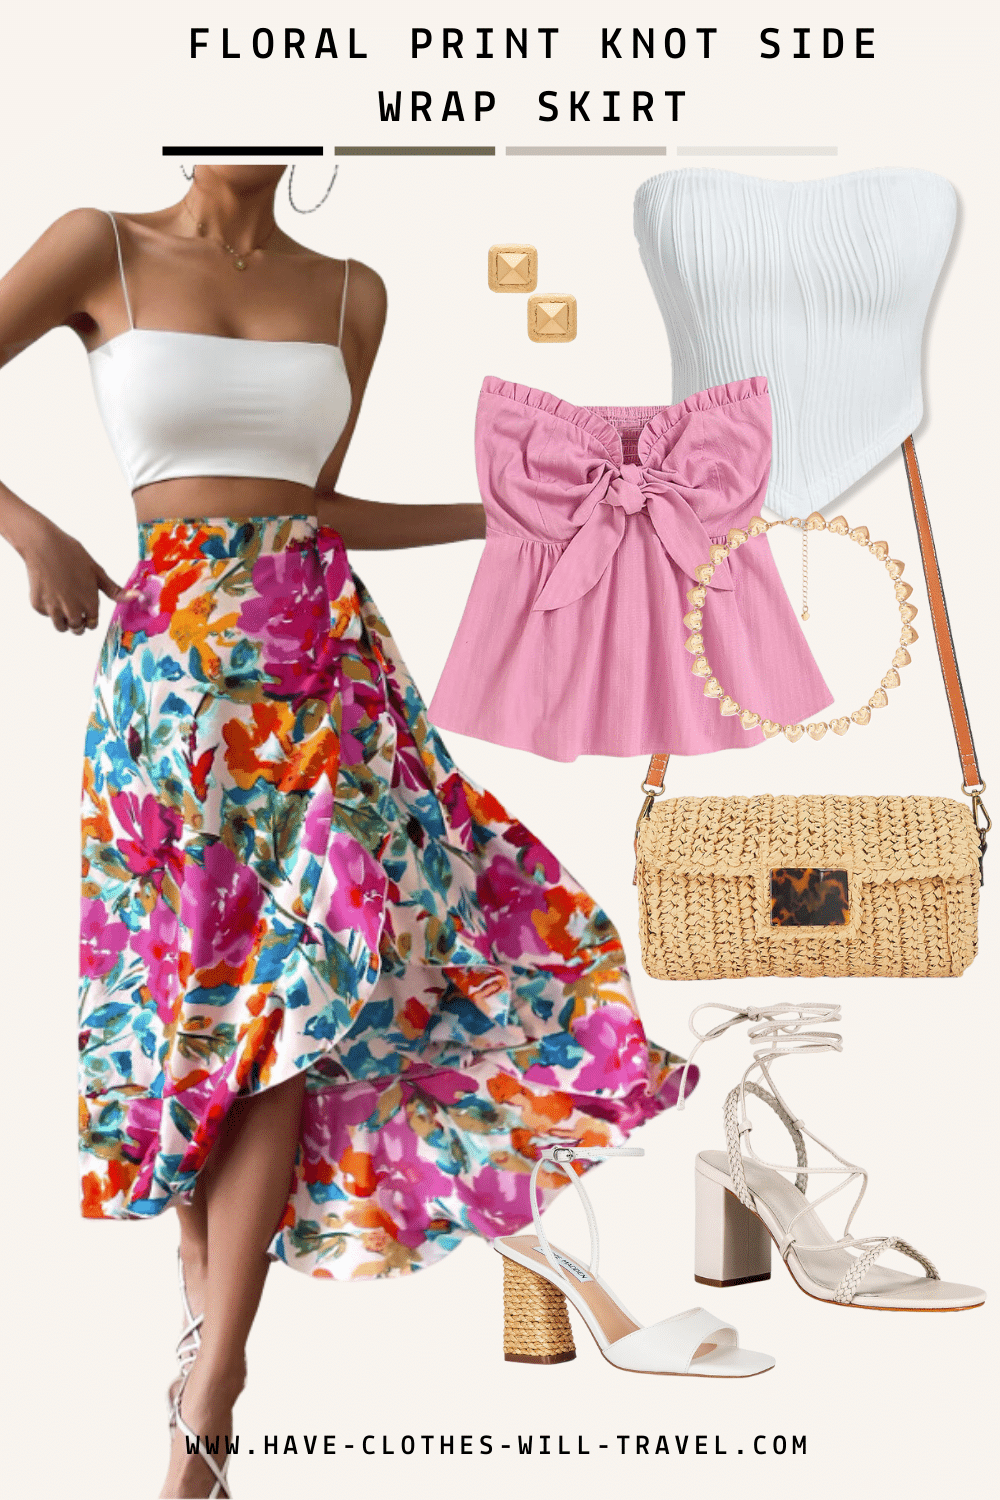 20+ Cute Outfit Ideas For An Amazing Beach Date